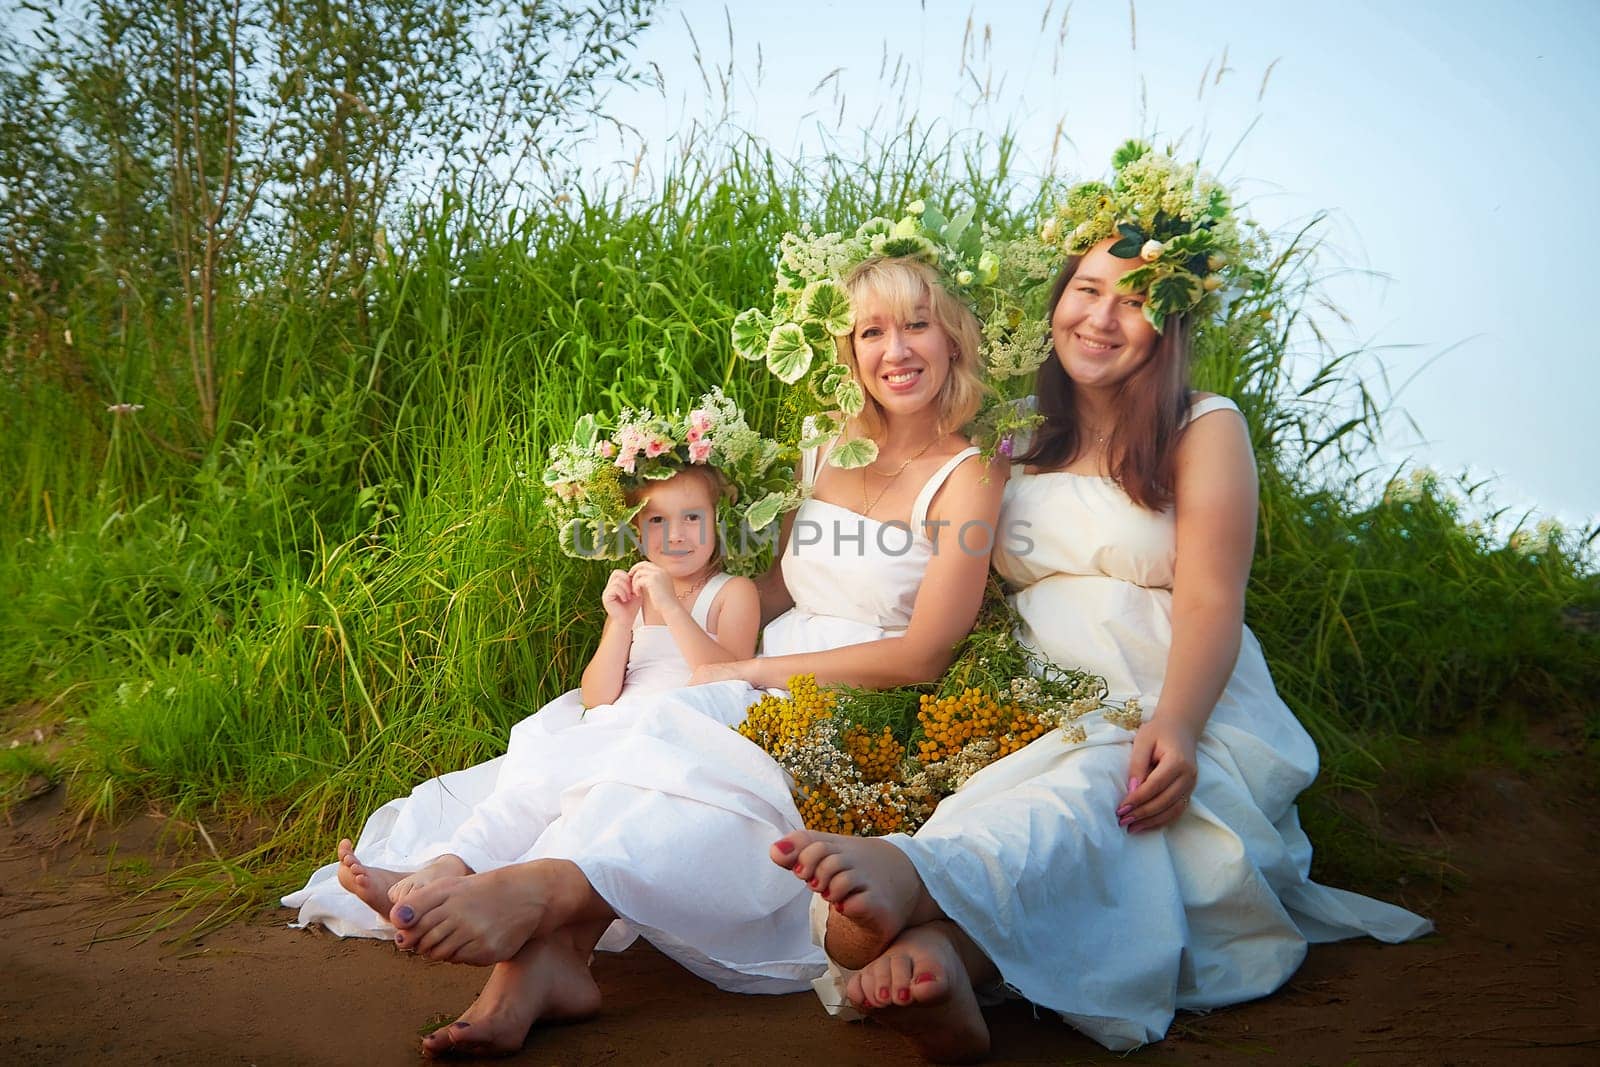 Ivan Kupala Celebration, photoshoot. Portrait of Girls With Floral Wreaths by the River at Sunset. Family clad in white dresses celebrate at dusk by keleny